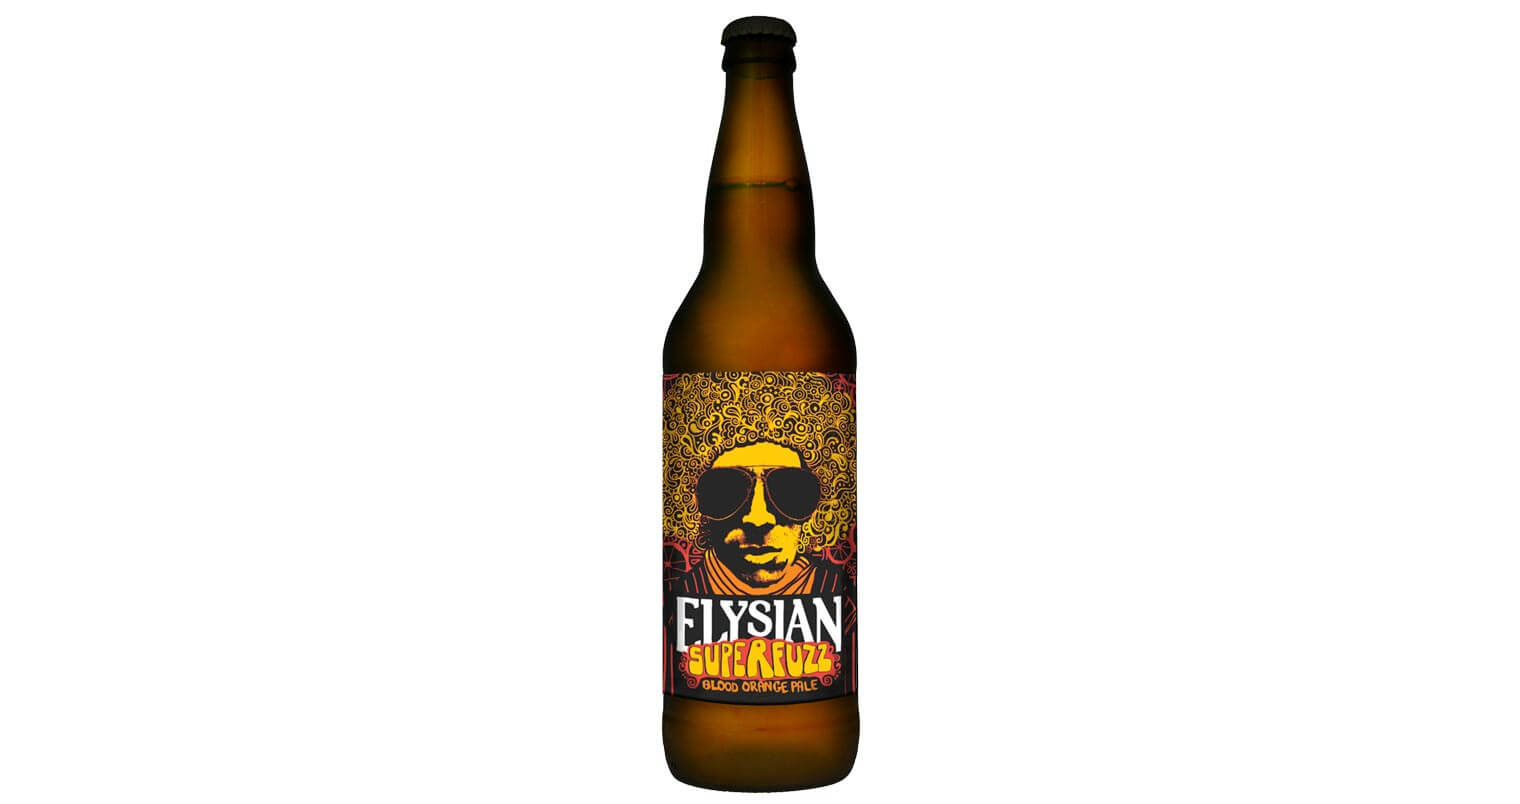 Elysian Brewing Launches Superfuzz Blood Orange Pale, featured image